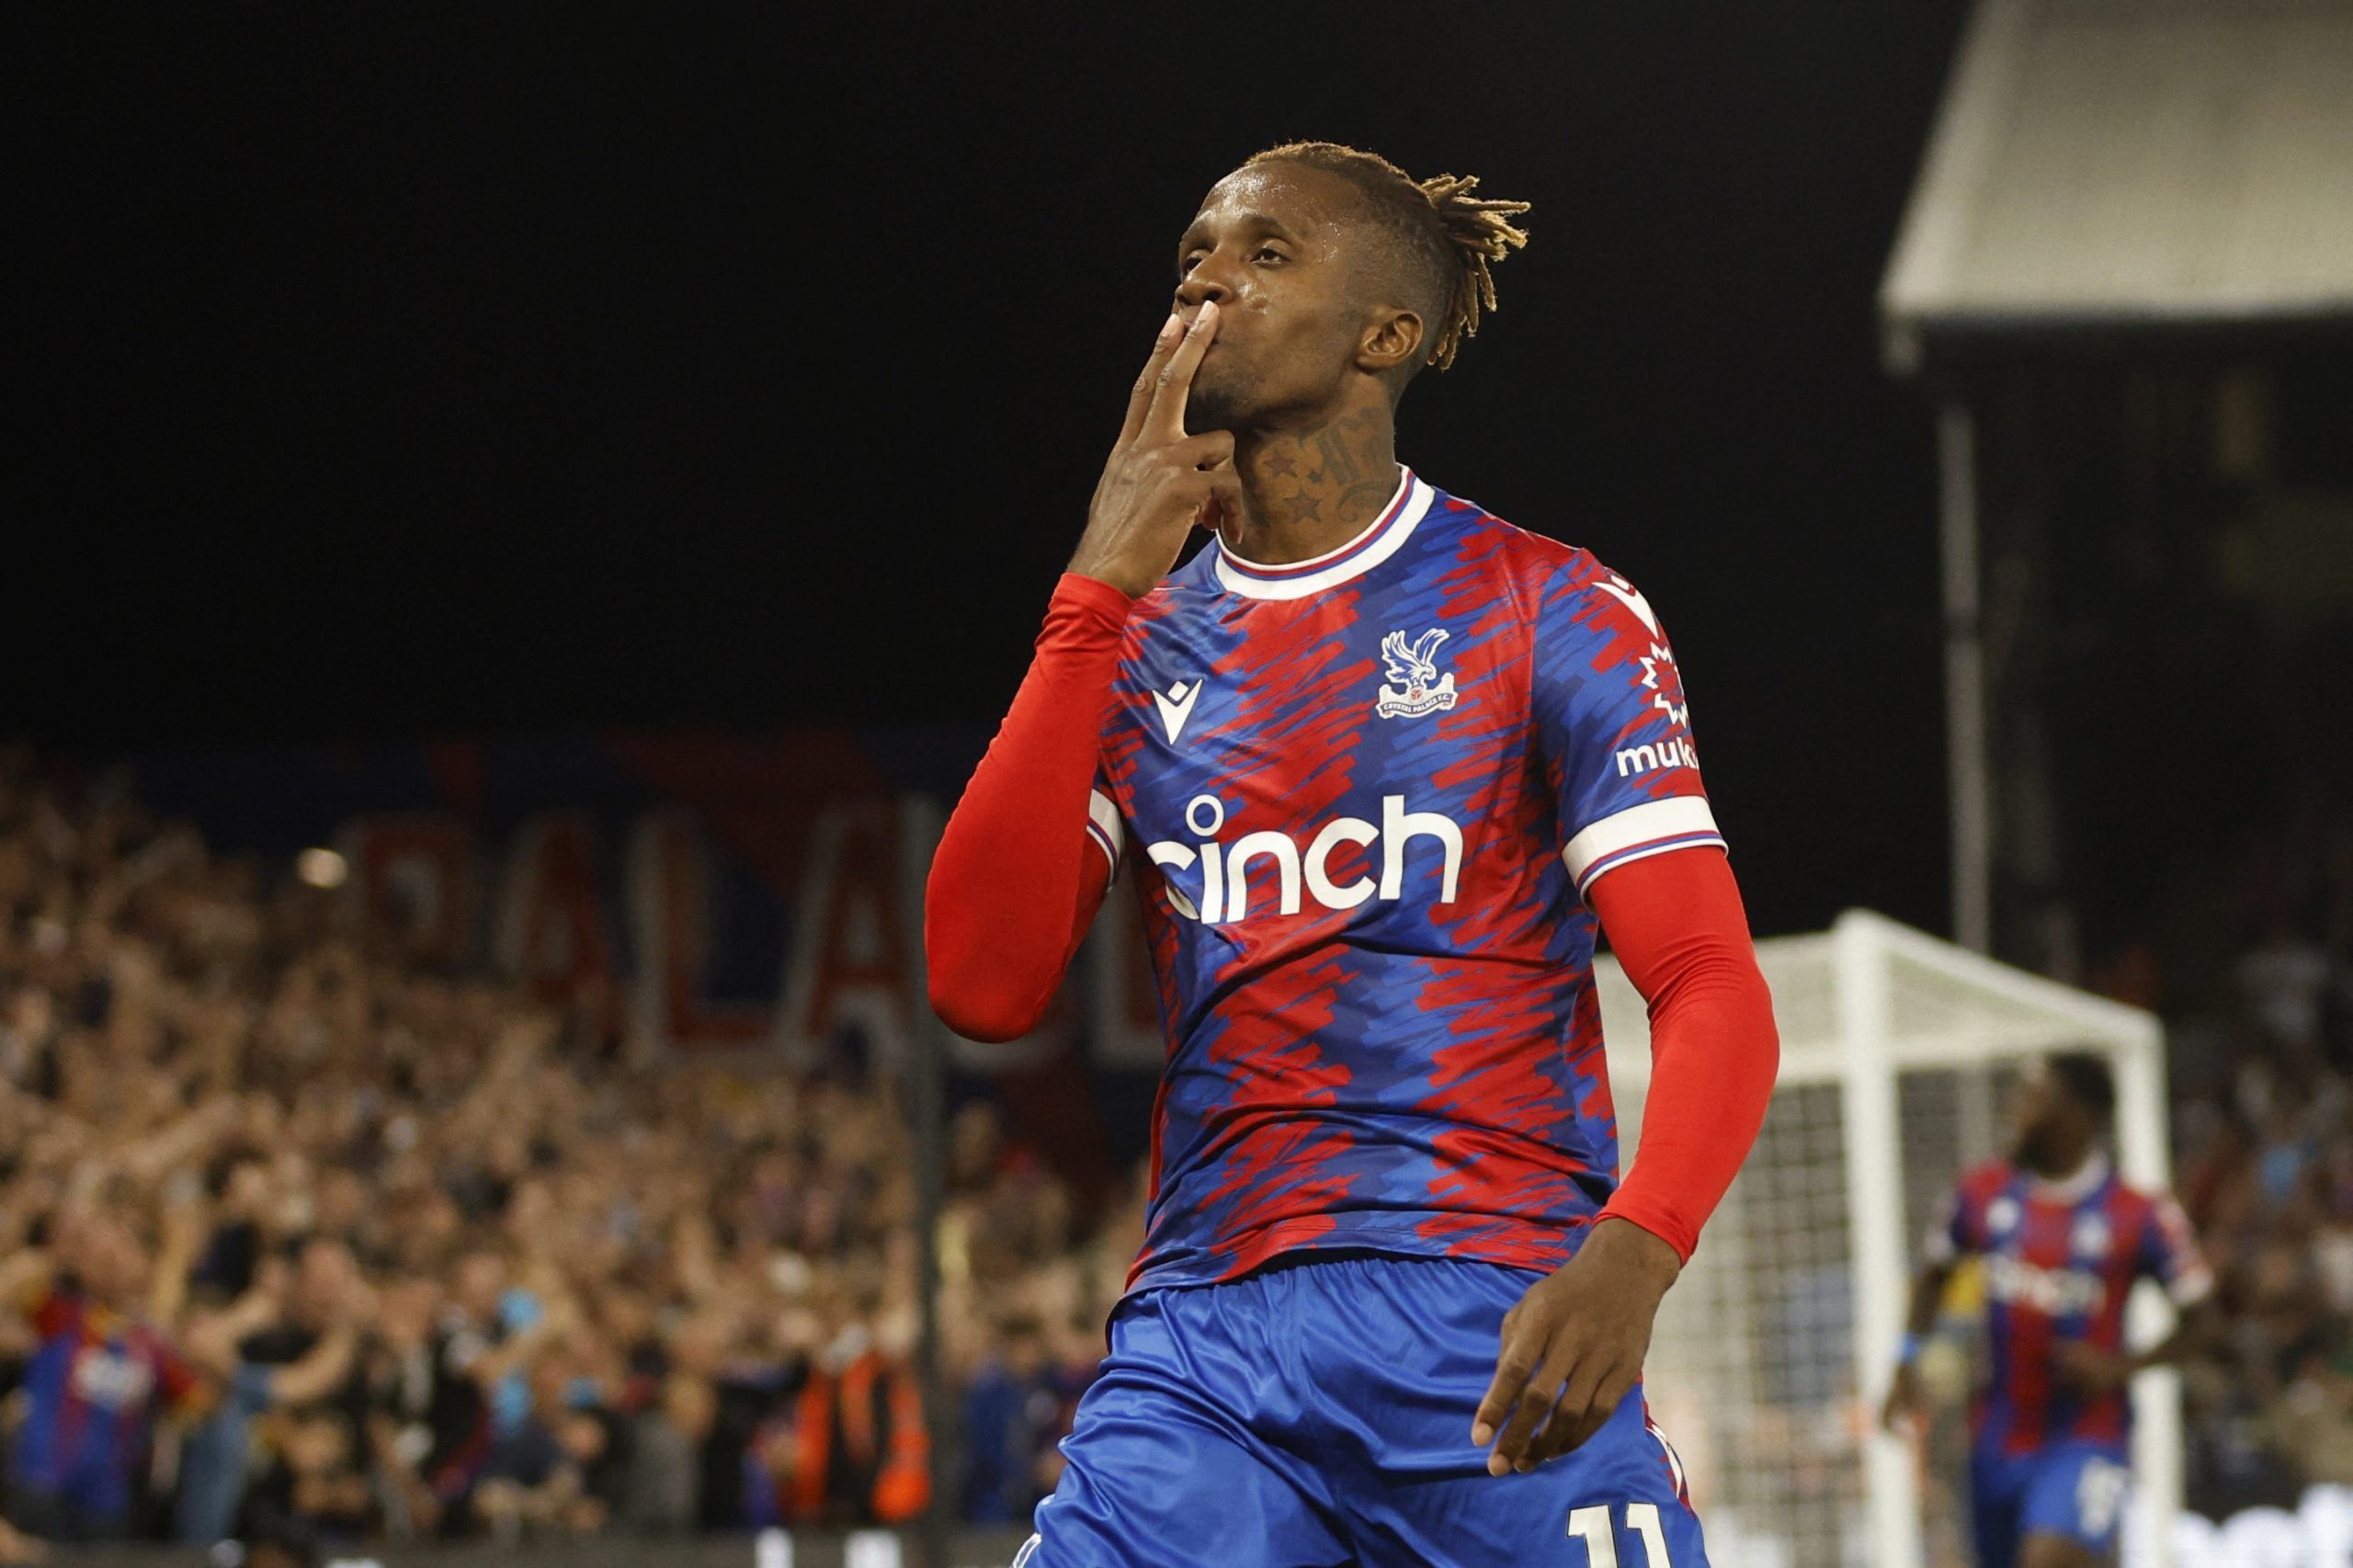 Premier League, Crystal Palace, Wilfried Zaha, CPFC, Palace news, Palace transfers, CPFC transfers, CPFC opinion, CPFC latest update, Selhurst Park